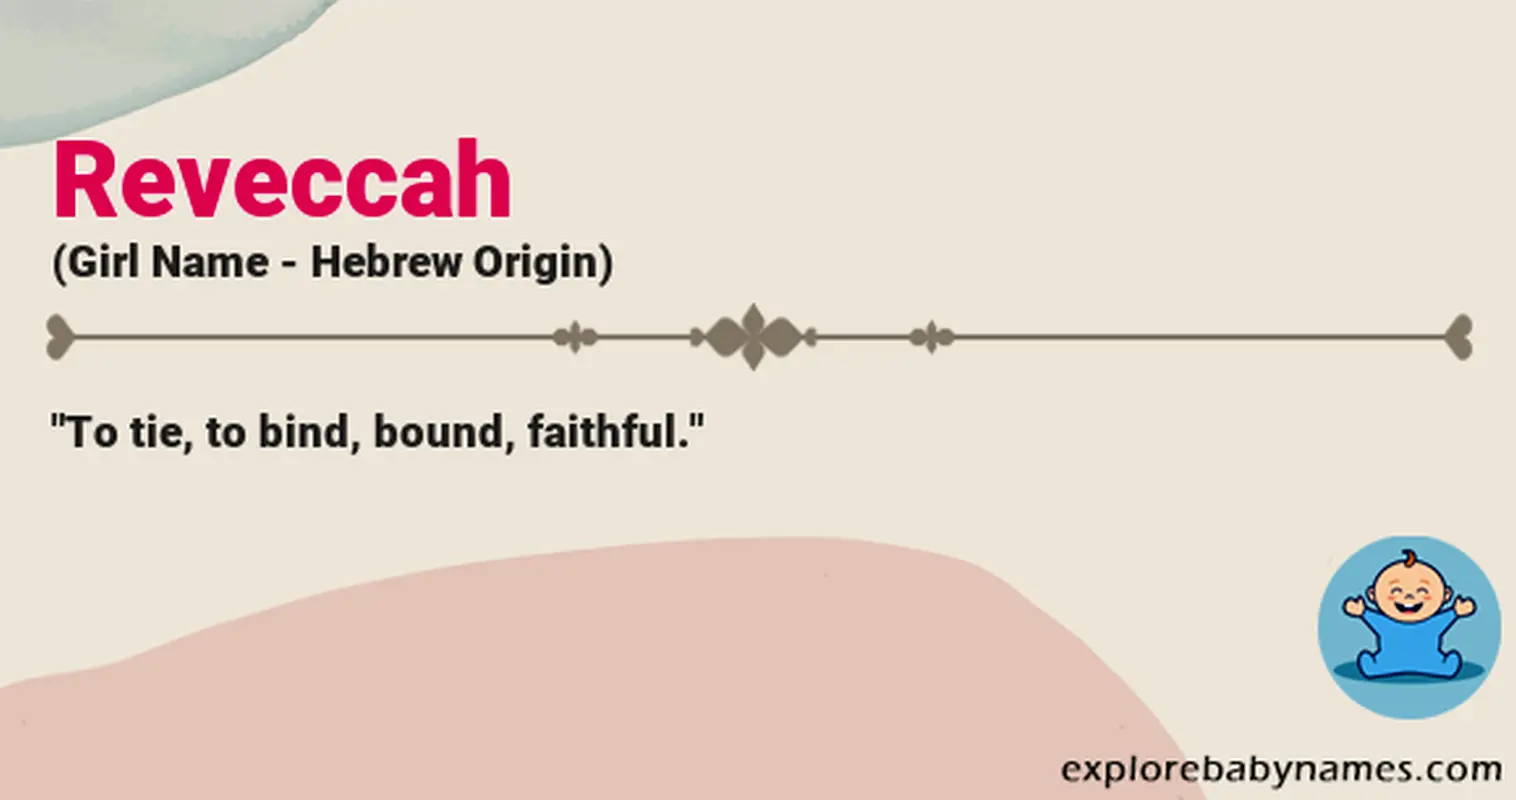 Meaning of Reveccah